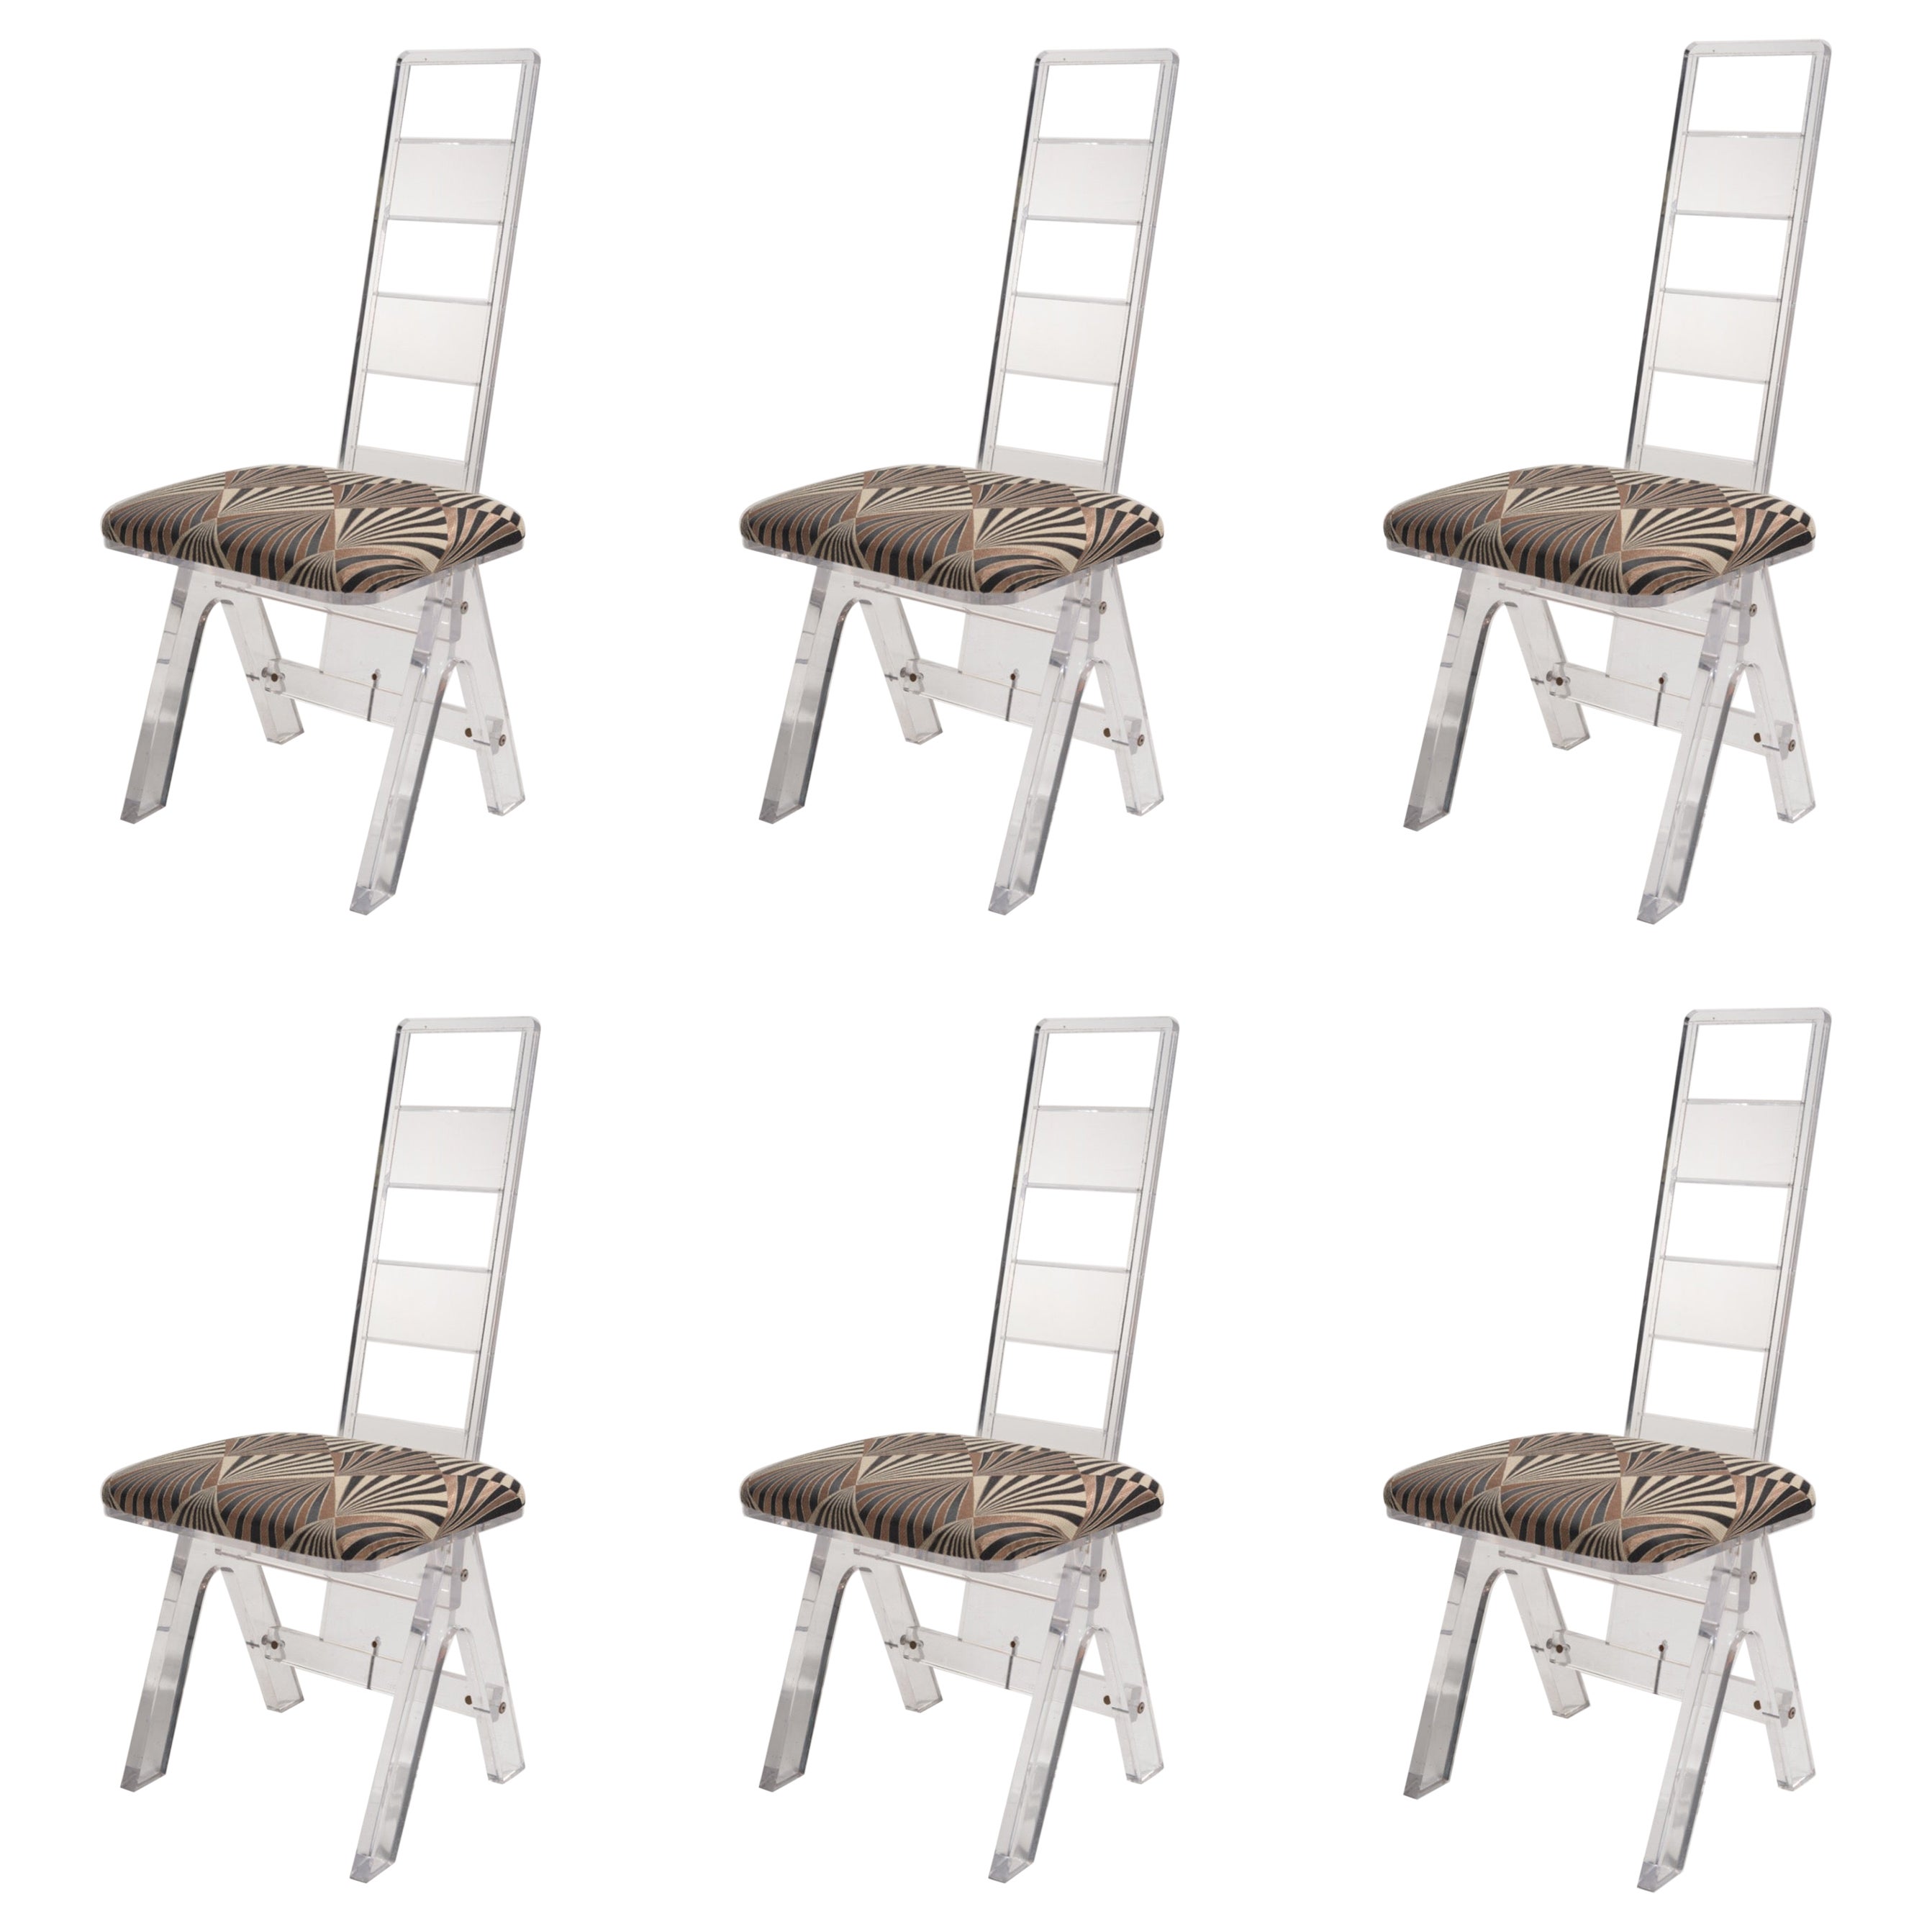 Set of 6 Lucite Chairs by Herb Rittz, c1970